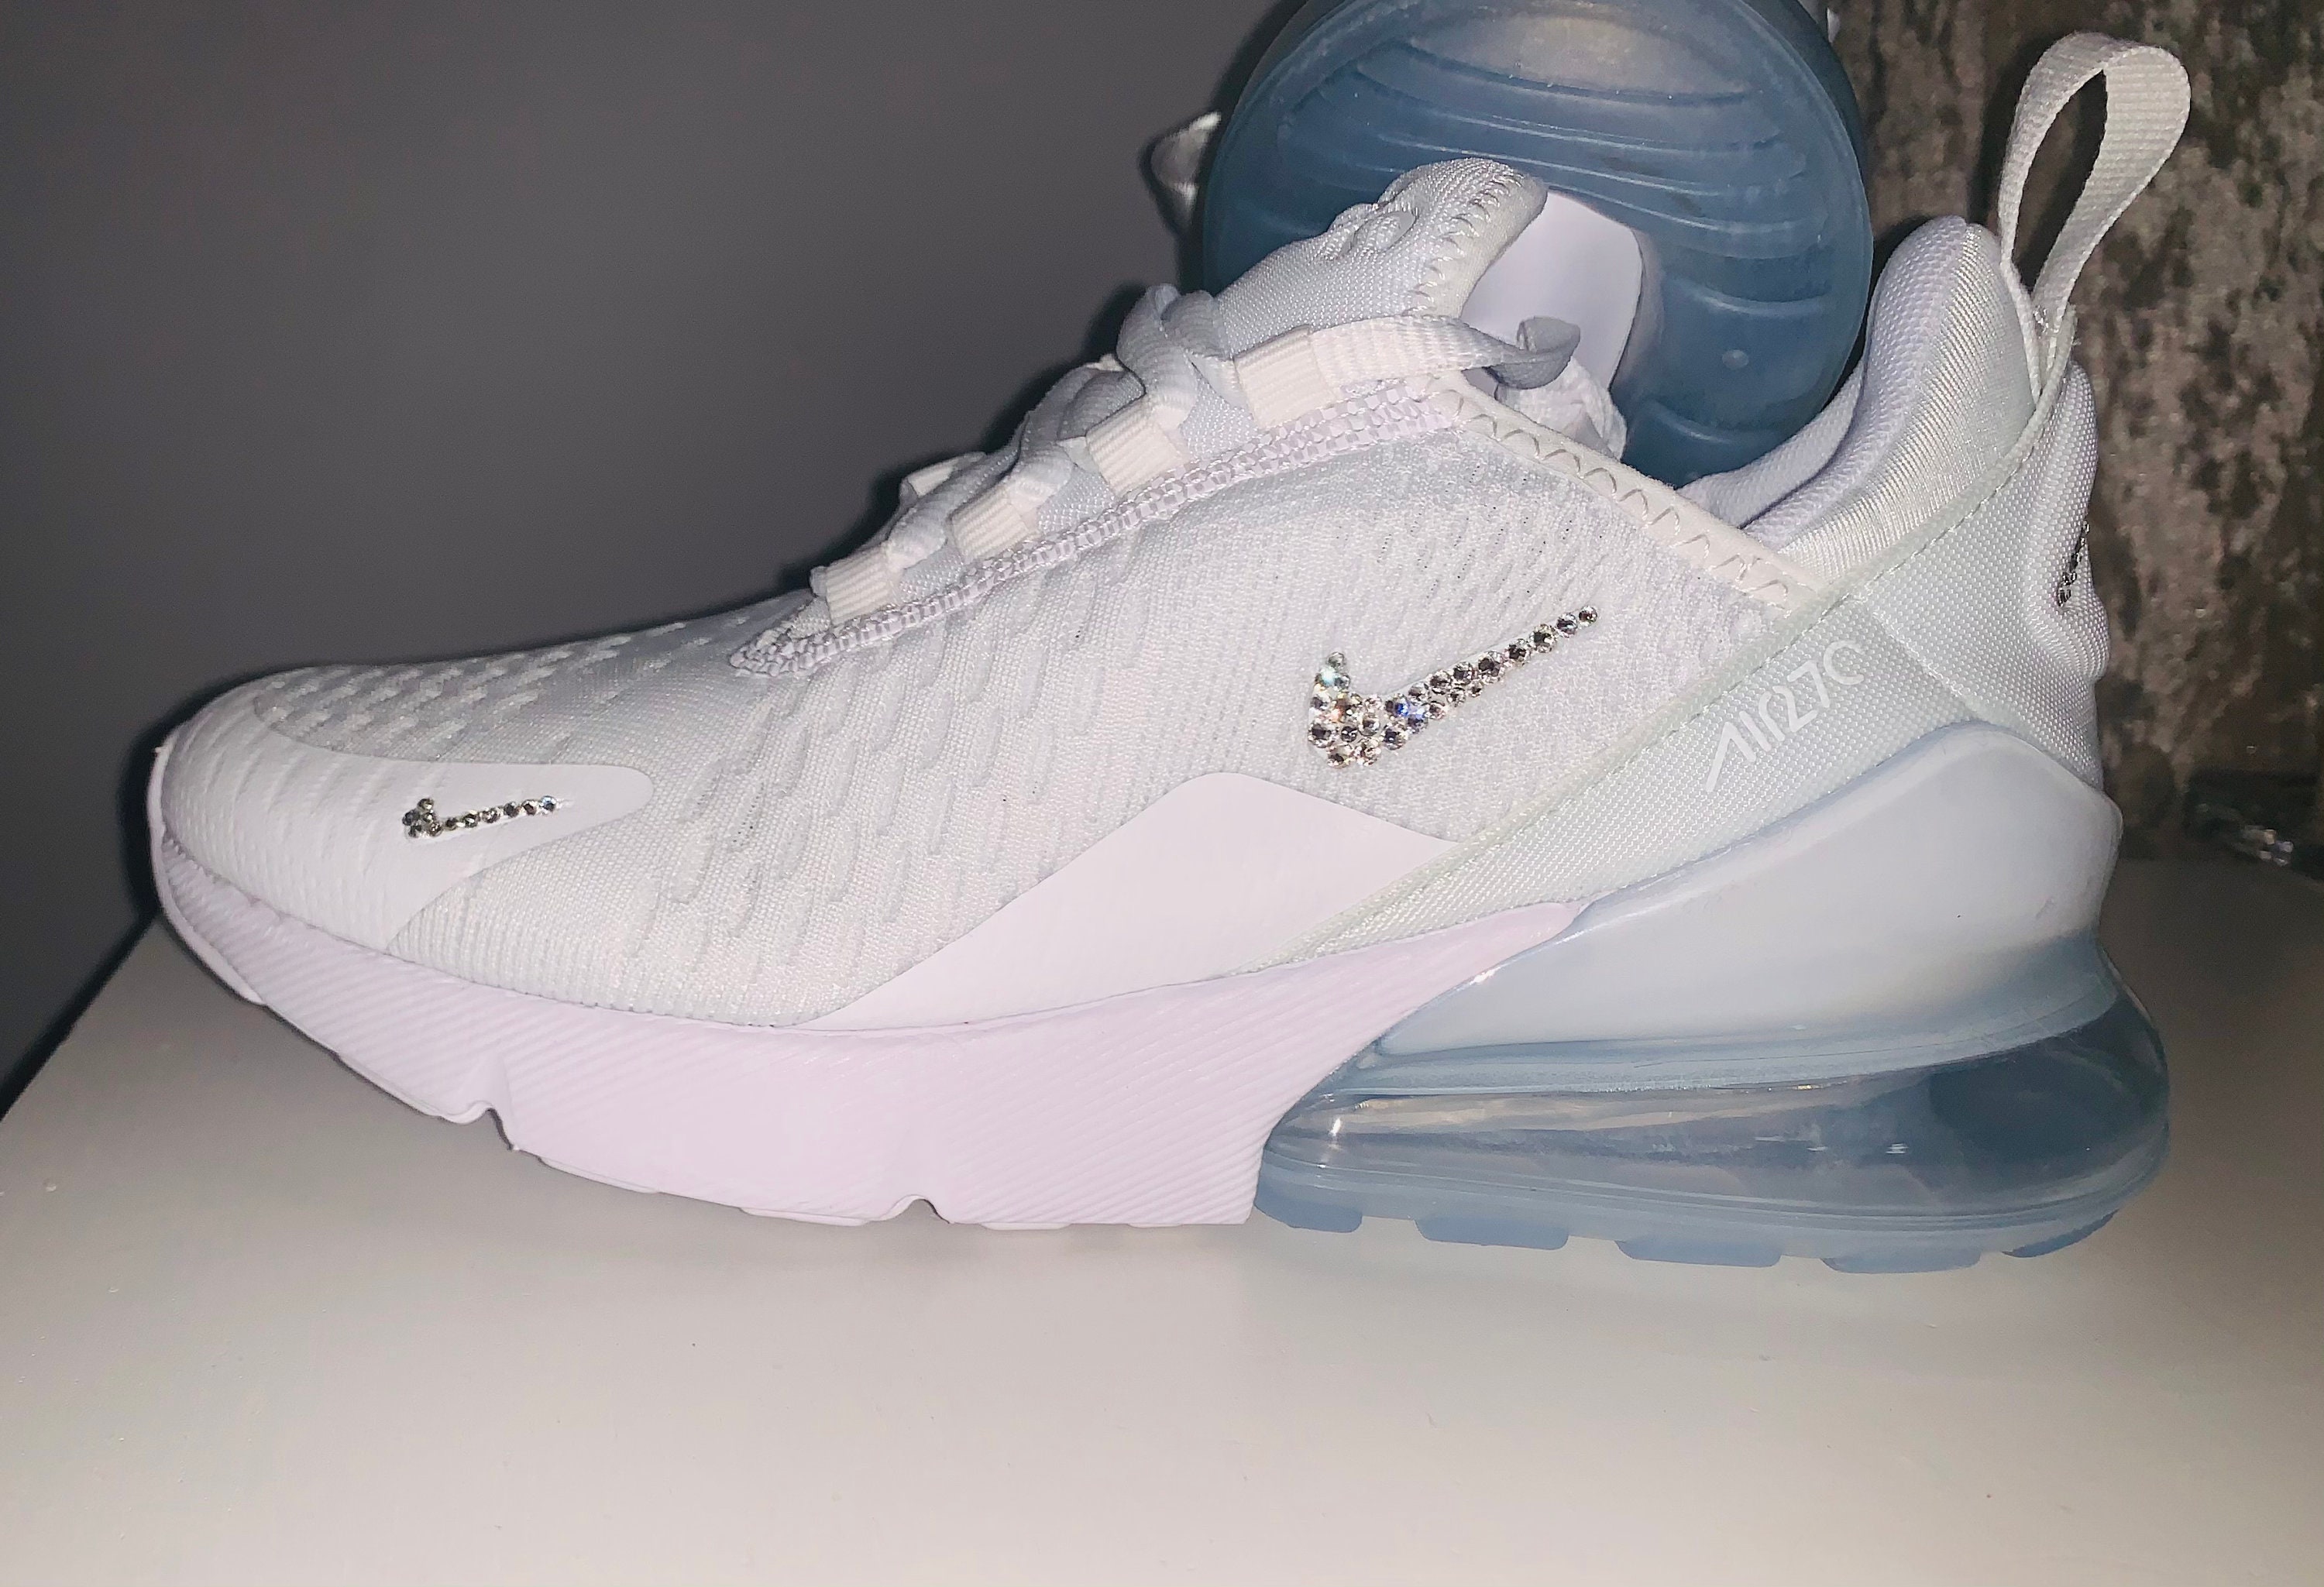 Beautiful White Nike Air Max 270 Trainers. Hand Customised | Etsy